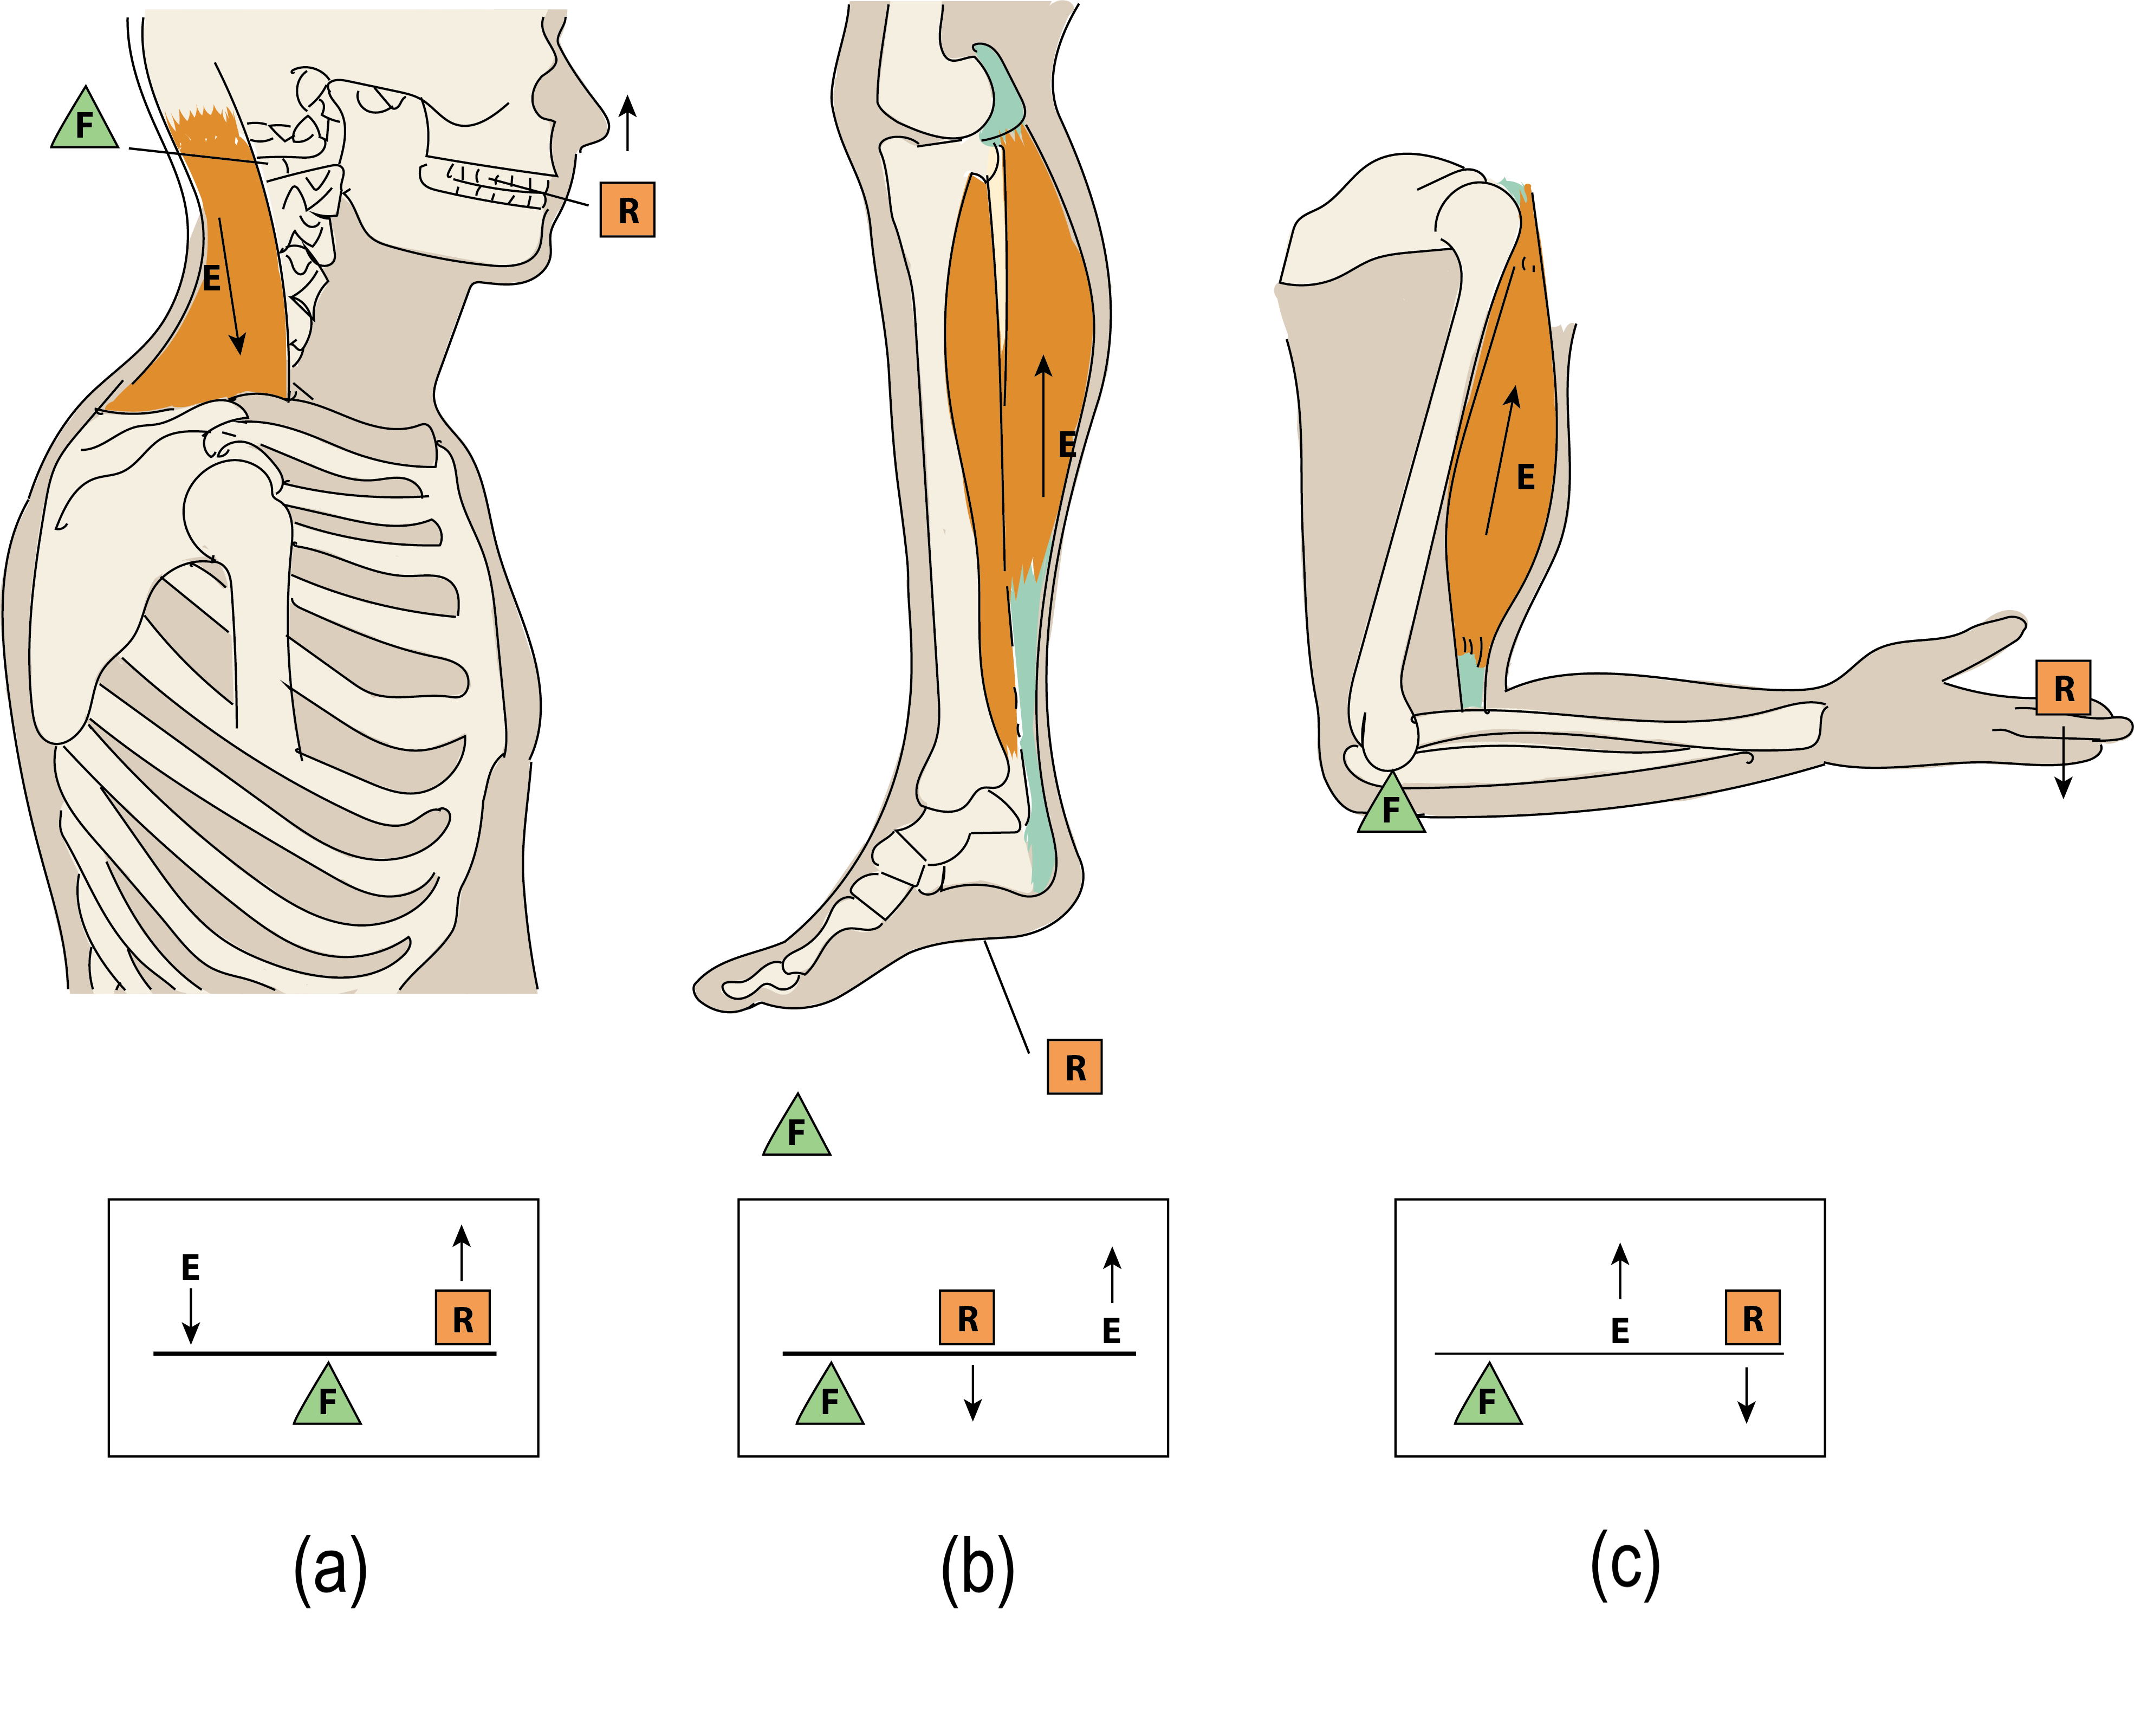 Lever systems represented in the head, leg, and arm, with simplified arrangement also show.